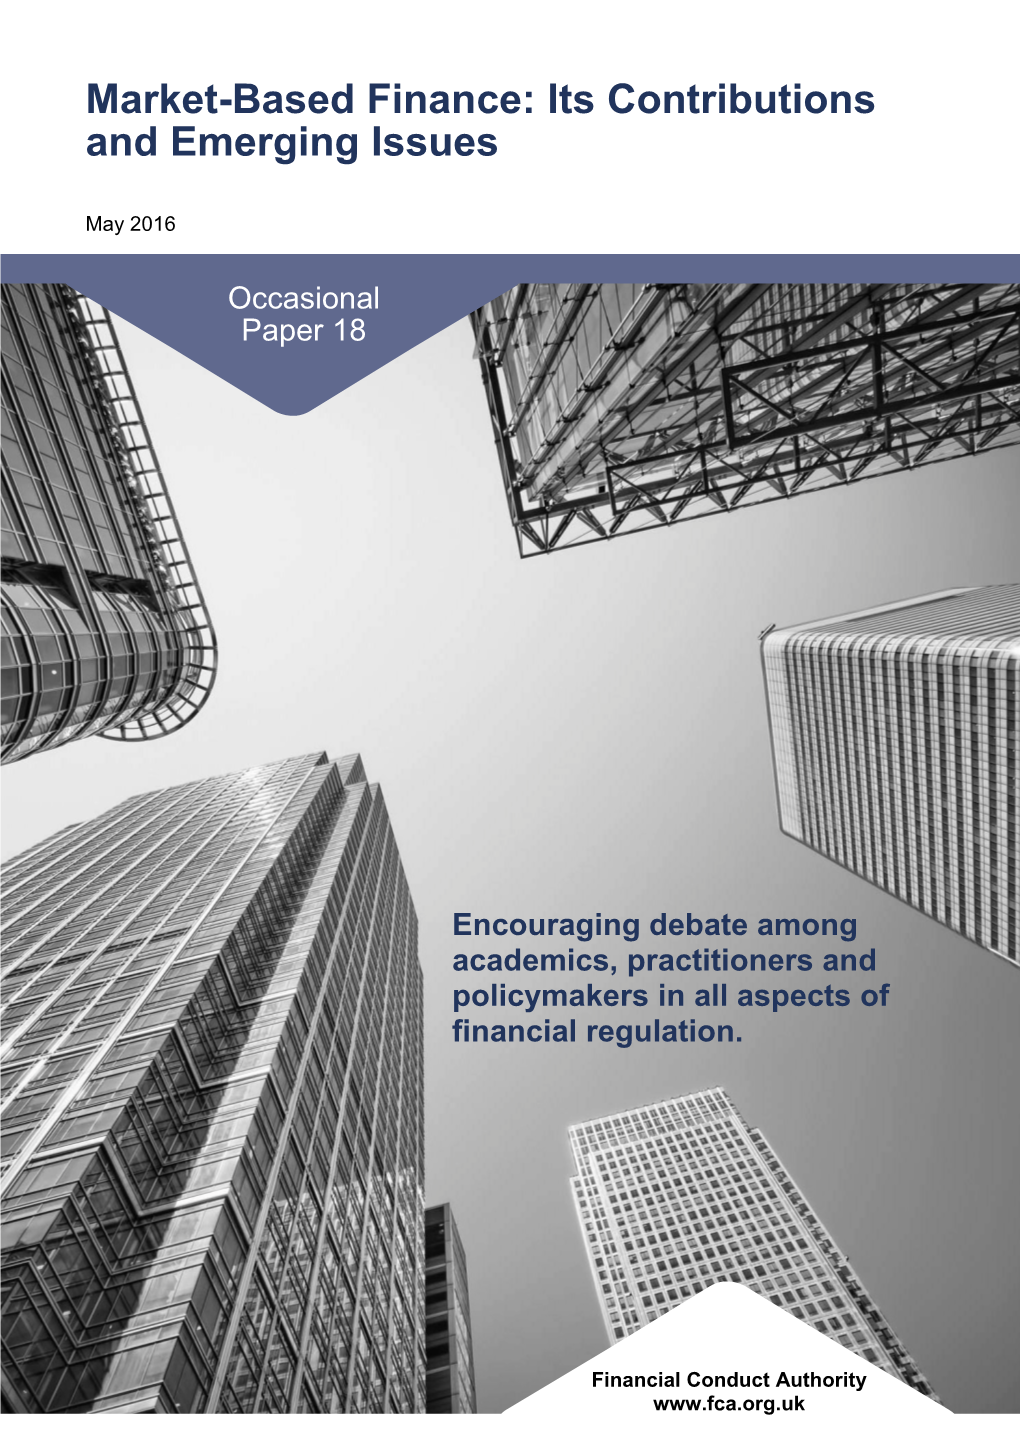 Market-Based Finance: Its Contributions and Emerging Issues